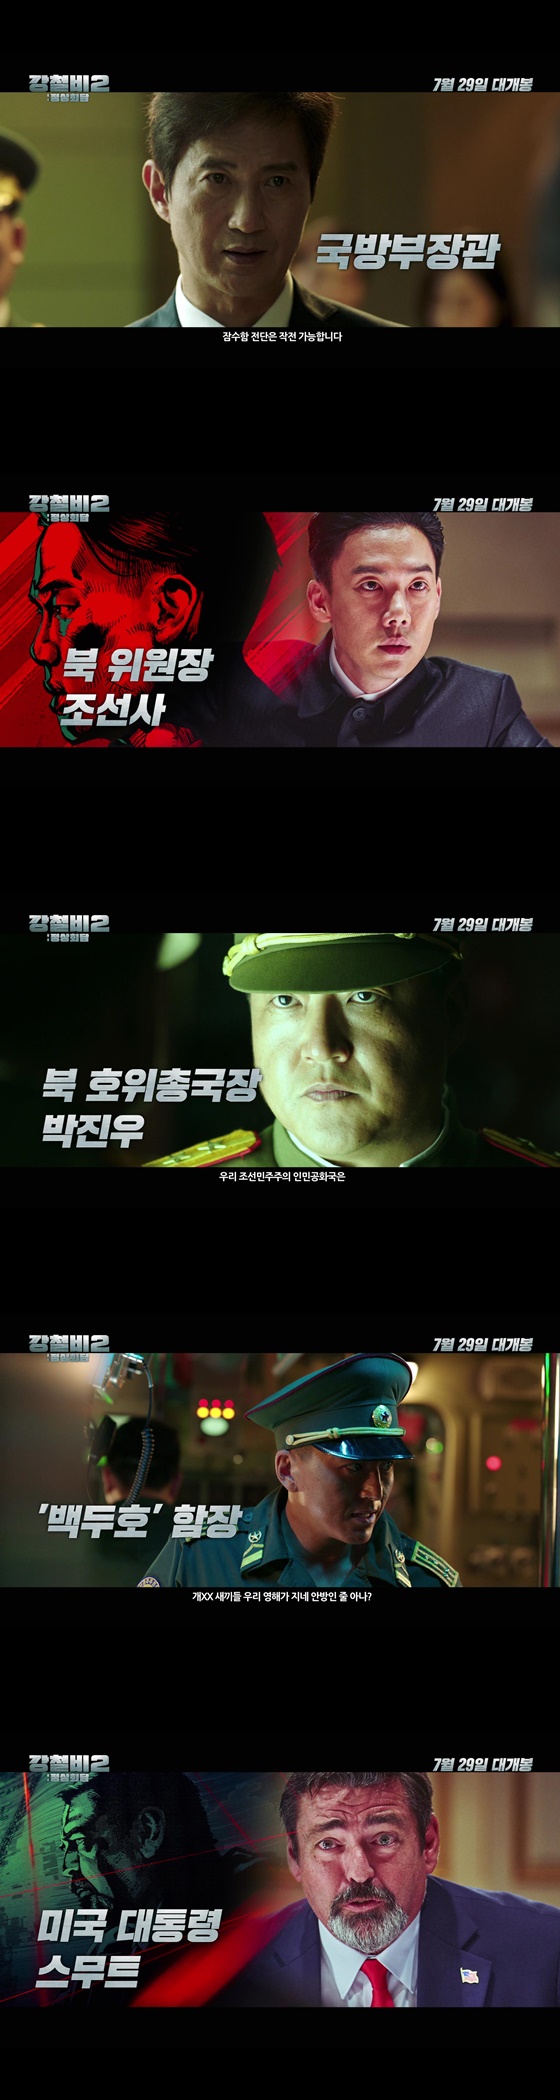 On the 13th, Lotte Entertainment released a character trailer for Steel Rain 2: Summit.The movie Steel Rain 2: Summit depicts the crisis just before the war that takes place after the three leaders were kidnapped by the nuclear submarines of the North during the North and South American Summit.President South Korea (Jung Woo-sung) is a petty husband who shares his troubles with his daughter and a normal father who is almost deprived of his allowance before being the supreme leader of a Europe, and shares his drink with the first lady (Yeom Jung-ah), and can be seen as the most comfortable and human charm when he is with his family.On the other hand, I feel sad that I can not do anything as President of South Korea, a division party, like the ambassador I have been invited to this peace talks but we have no place to sign, but the fact that I am in a hurry to narrow the gap between the two leaders of North Korea and the US,At the time of efforts to establish a peace regime in Korean Peninsula, South Korea will be trapped in North Nuclear submarines along with the North and the US leaders.South Koreas Prime Minister (Kim Yong-rim), the Security Chief (Lee Jae-yong) and the Minister of National Defense (the Guide) are the first to take care of the presidents safety and respond quickly, showing the solid South Koreas inner workings even in the absence of the president and raising expectations that it will add to the vitality of the drama.On the other hand, Kwak Do-won, who played the chief of the escort who caused the coup, thought that the North would live only by continuing the alliance with China, saying, Our Democratic Peoples Republic of Korea is reforming and opening up wrong, and Europe is ruined. He expressed the patriotism and beliefs of North Korean hardliners convincingly with his heavy acting.Here, the appearance of the North Korean chief strategist Baek Doo-ho (Sin Jung-geun) and the captain (Ryu Soo-young) in the submarine battle stimulates curiosity about what they will do between the leaders of the South, North and the US and the escort general, who are confined to the North Nuclear submarines.Finally, Smoot (Angus McFadden) is a United States of America president from a businessman whose priority is to return home with the North Korean nuclear program with the aim of making United States of America great again.The United States of America President Smoot, who is trapped in a narrow captains room but does not hesitate to speak to North Korean soldiers who threaten him with a self-centered attitude, American First, is curious with a variety of tensions and comics.Also, the appearance of United States of America Vice President (Christine Dalton) and United States of America Secretary of State (Colby French) who are the first to check emerging powerhouse China and do not hesitate to launch ICBM (Intercontinental Ballistic Missile) in the face of the kidnapping of South, North and US clean-up images is the issue of Korean Peninsula, It is predicted that it will spread to war that threatens peace all over the world, raising the sense of urgency.It is noteworthy that the characters will create a drama in the drama, as they have shown different interests in different ways, moving the fate of the South, the North and the U.S.Meanwhile, Steel Rain 2: Summit will be released on the 29th.